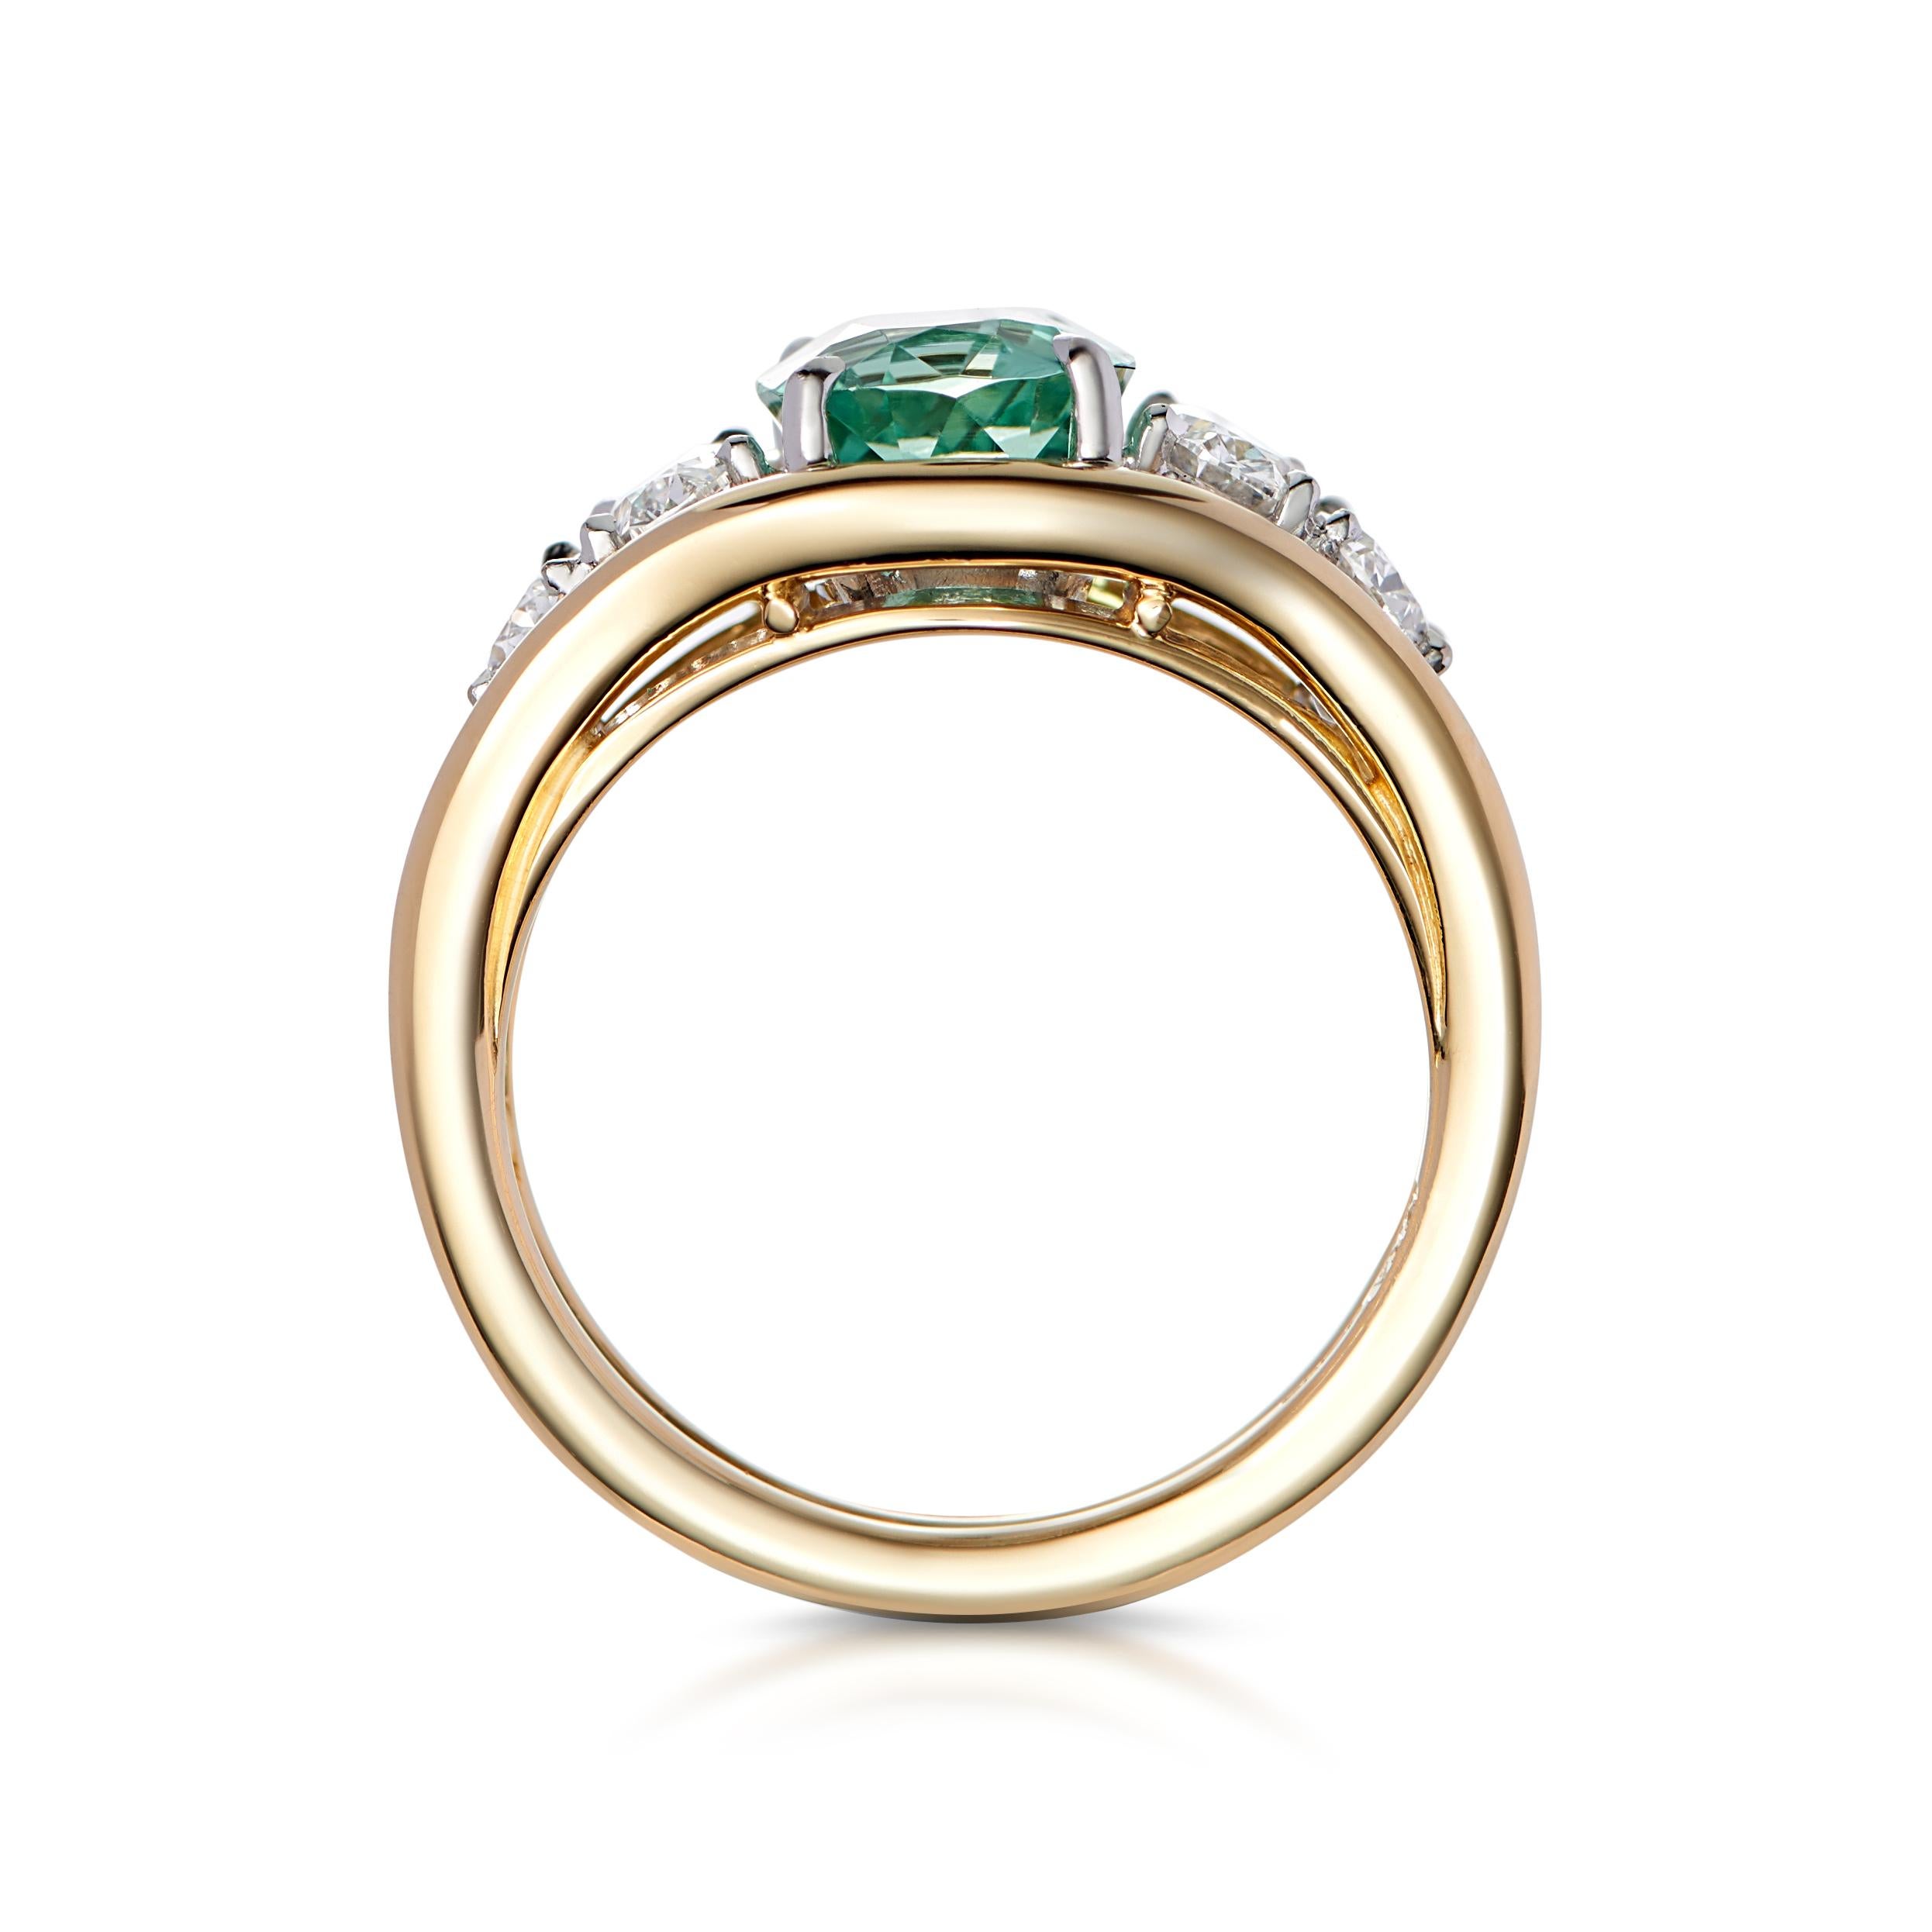 A spectacular Green Tourmaline set with 4 oval cut and white diamonds. This unique, one-of-a-kind statement ring is handmade in London in historic jewelry quarter, Hatton Garden. 

Tourmaline: 2ct
Diamonds: 0.80ct 
Karat: 18k yellow gold with white